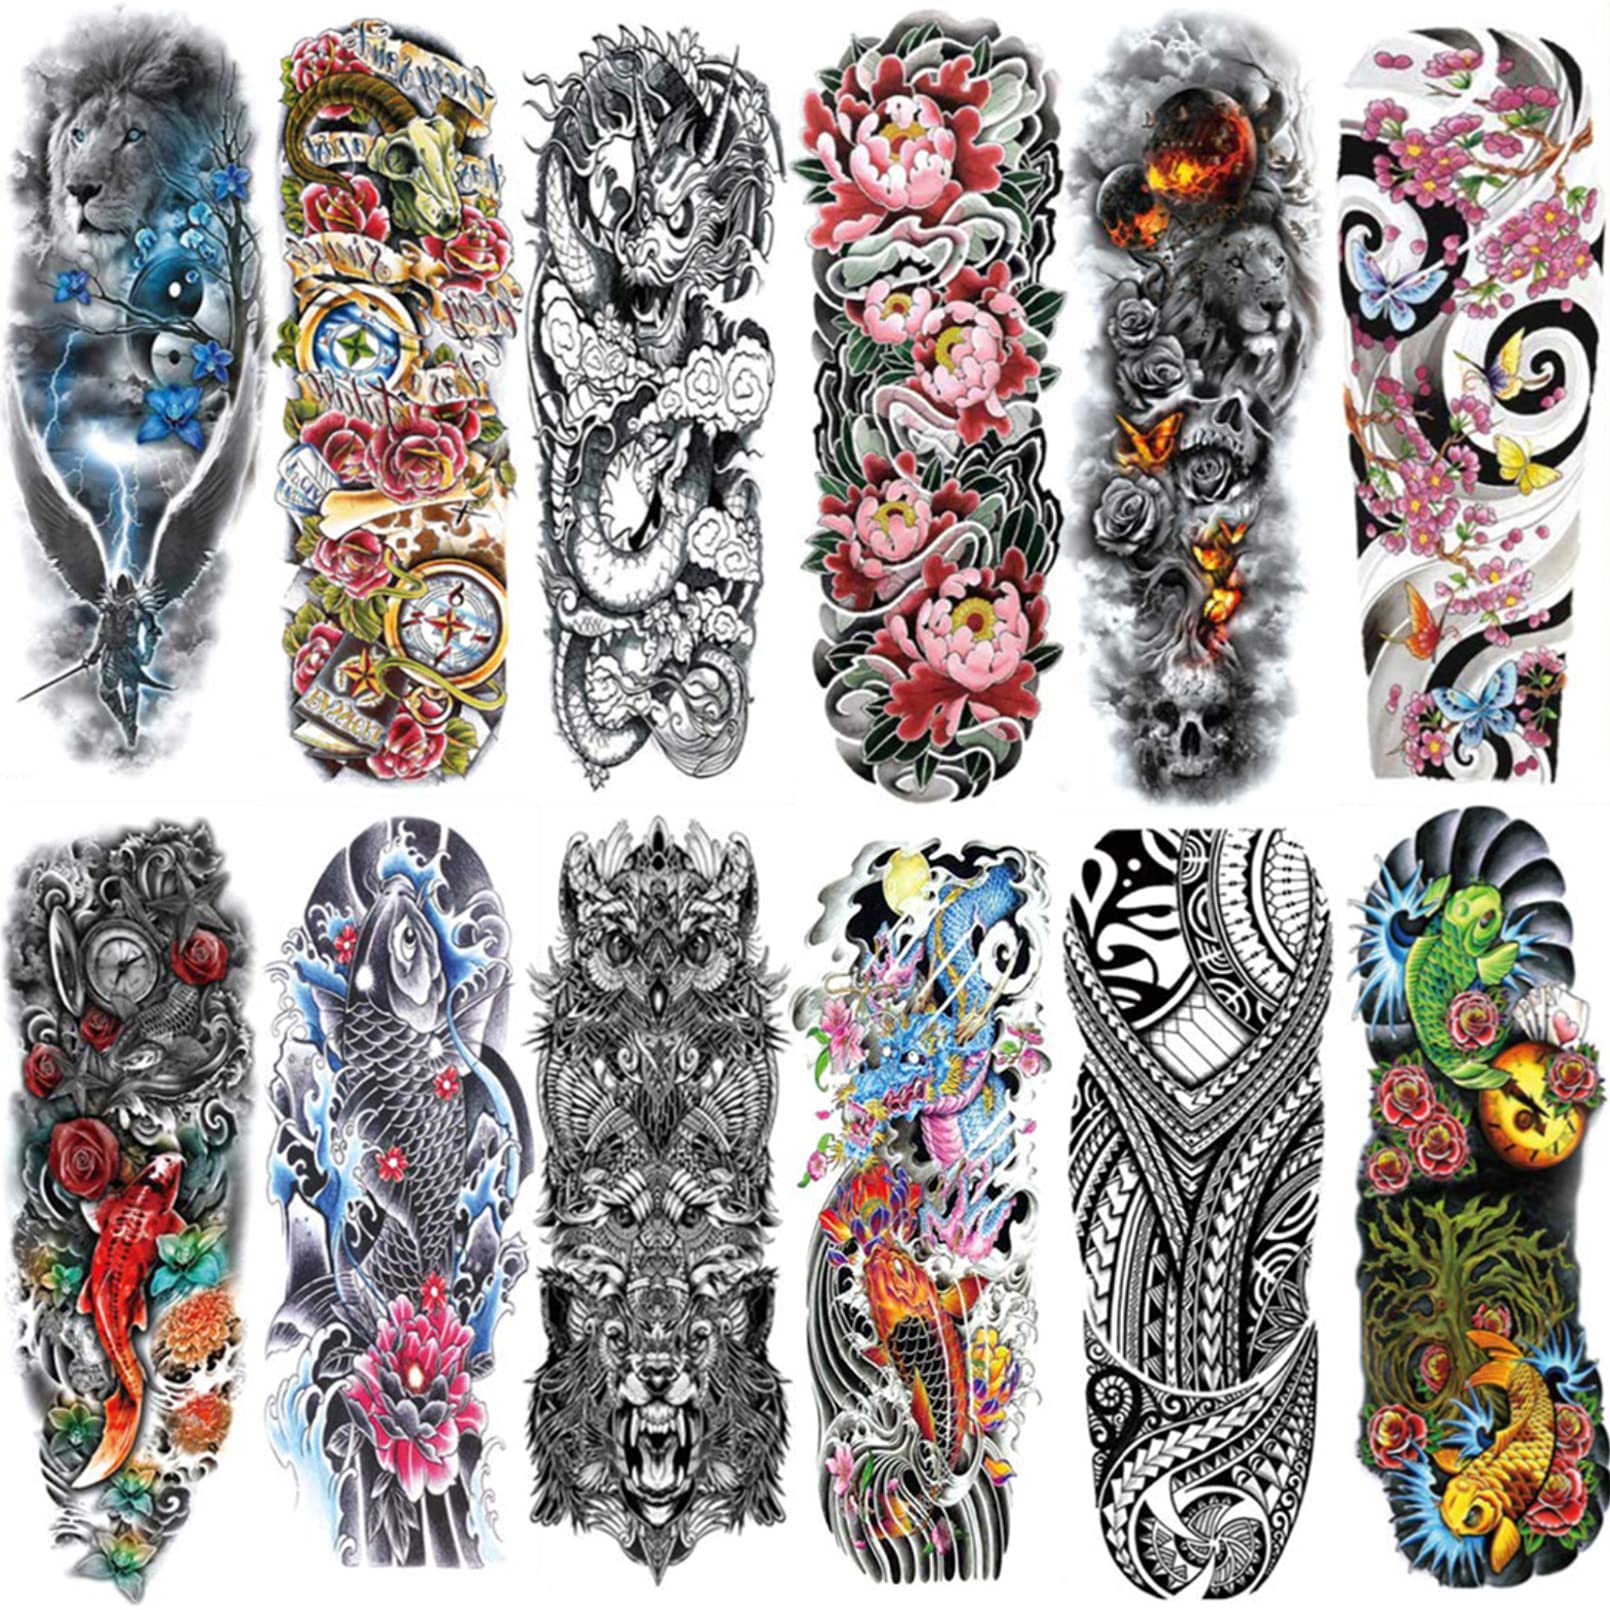 REALISTIC TEMPORARY TATTOO SLEEVE, DRAGON, CHINESE, ORIENTAL, ARM, MENS,  WOMENS